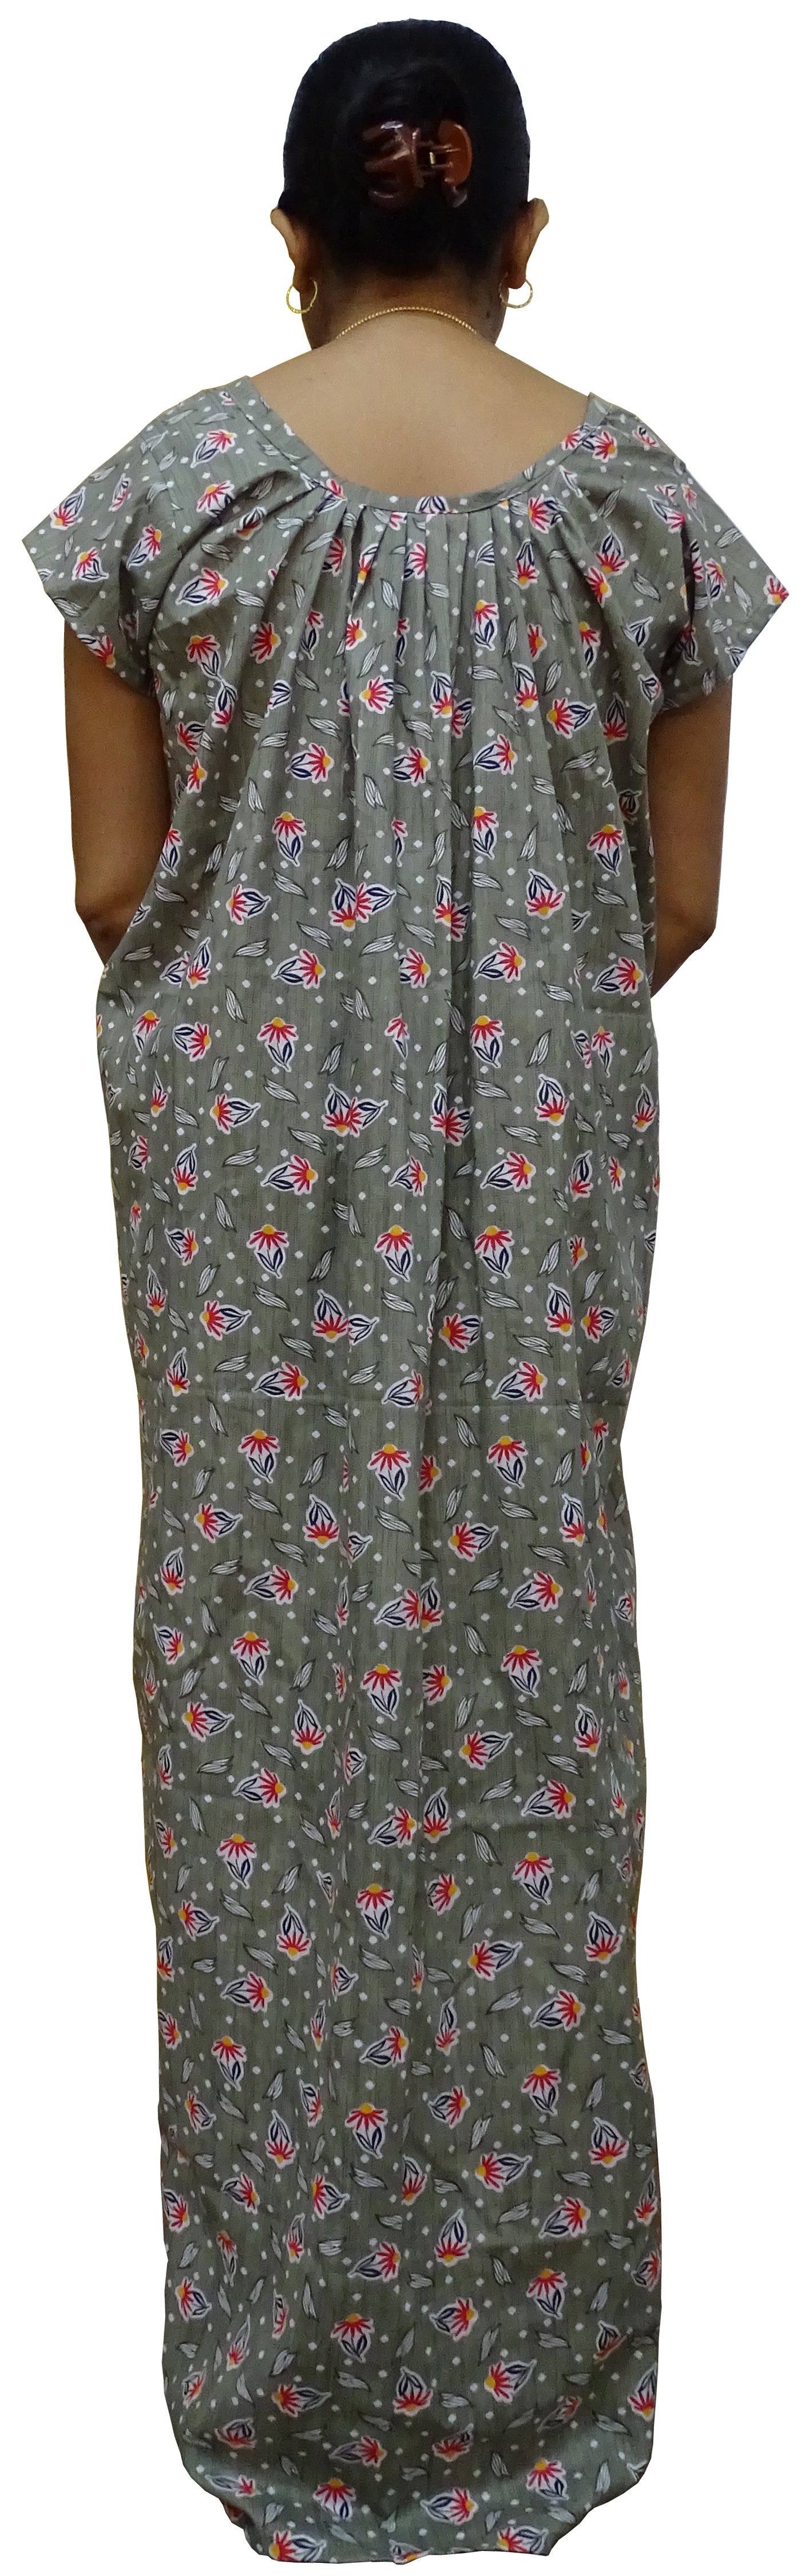 Nighty for Women Cotton Printed, Free Size, Grey Colour (Pack of 1)